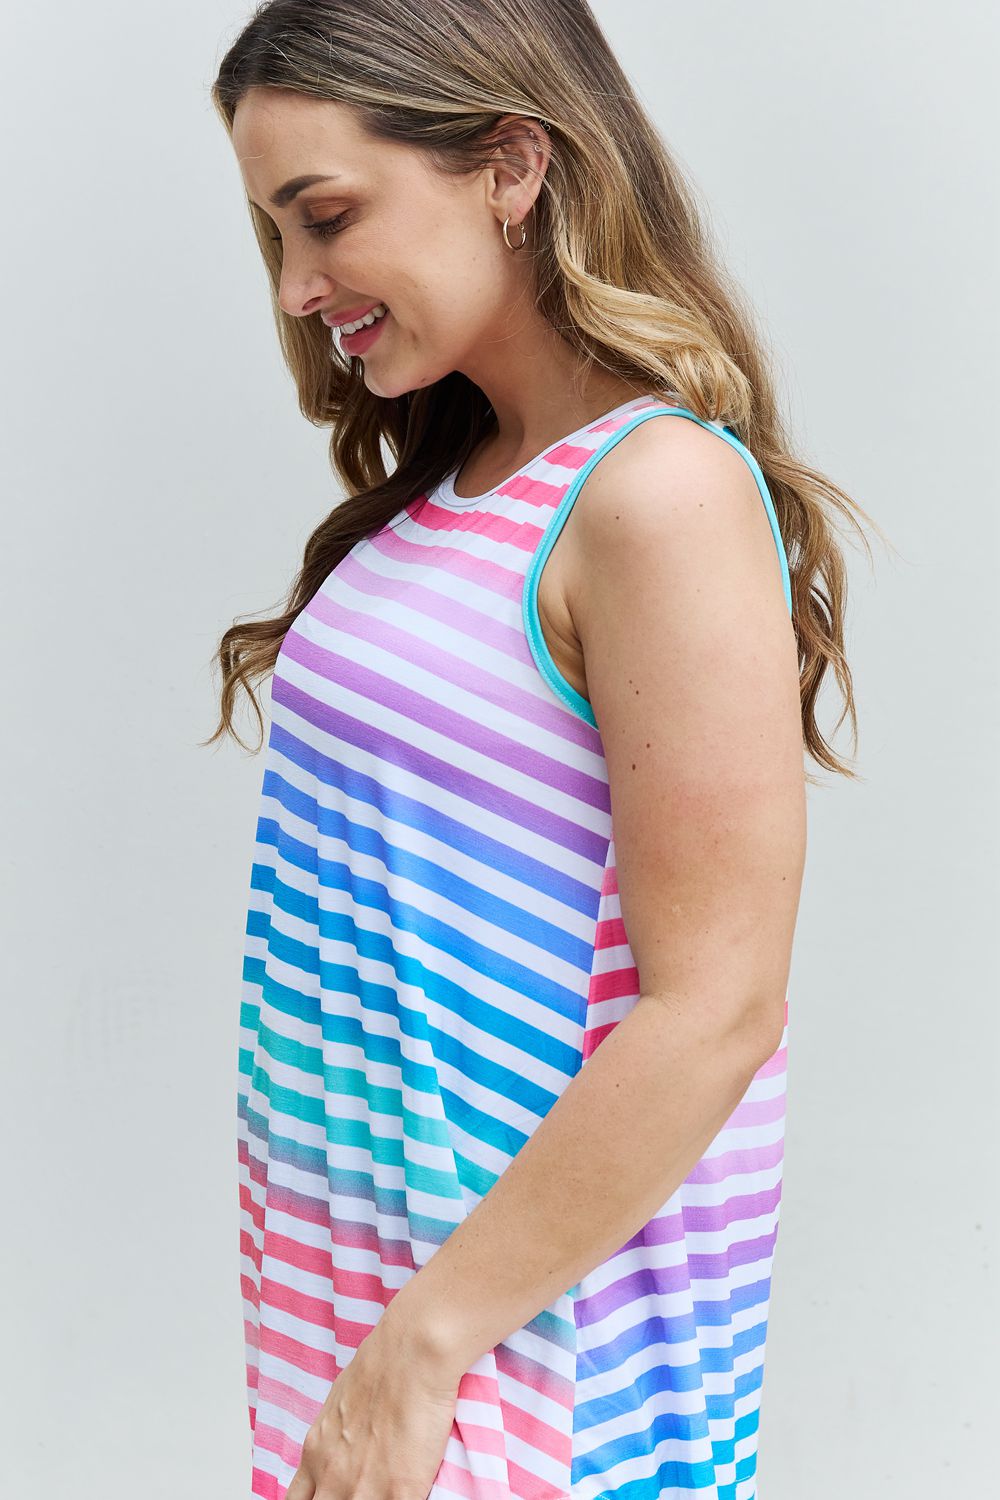 Heimish Love Yourself Full Size Multicolored Striped Sleeveless Round Neck Top | us.meeeshop